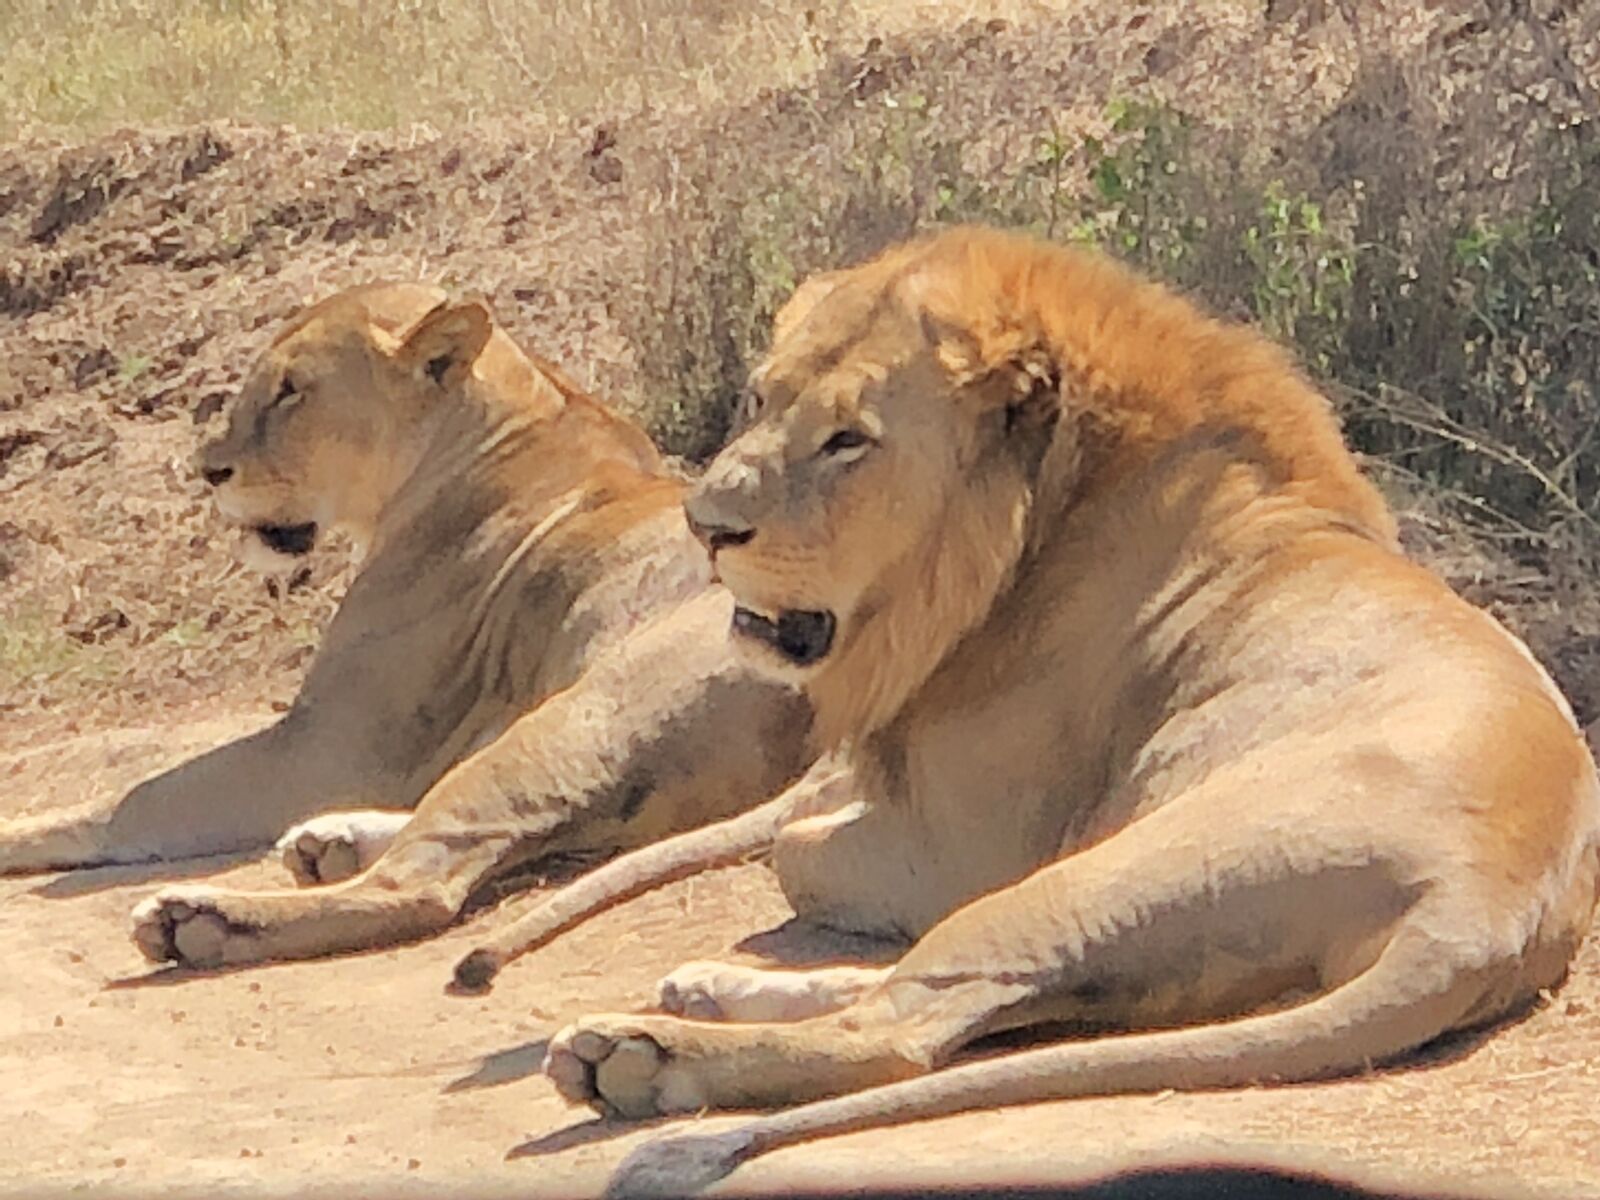 iPhone X back dual camera 6mm f/2.4 sample photo. Africa, thornybush, cats photography